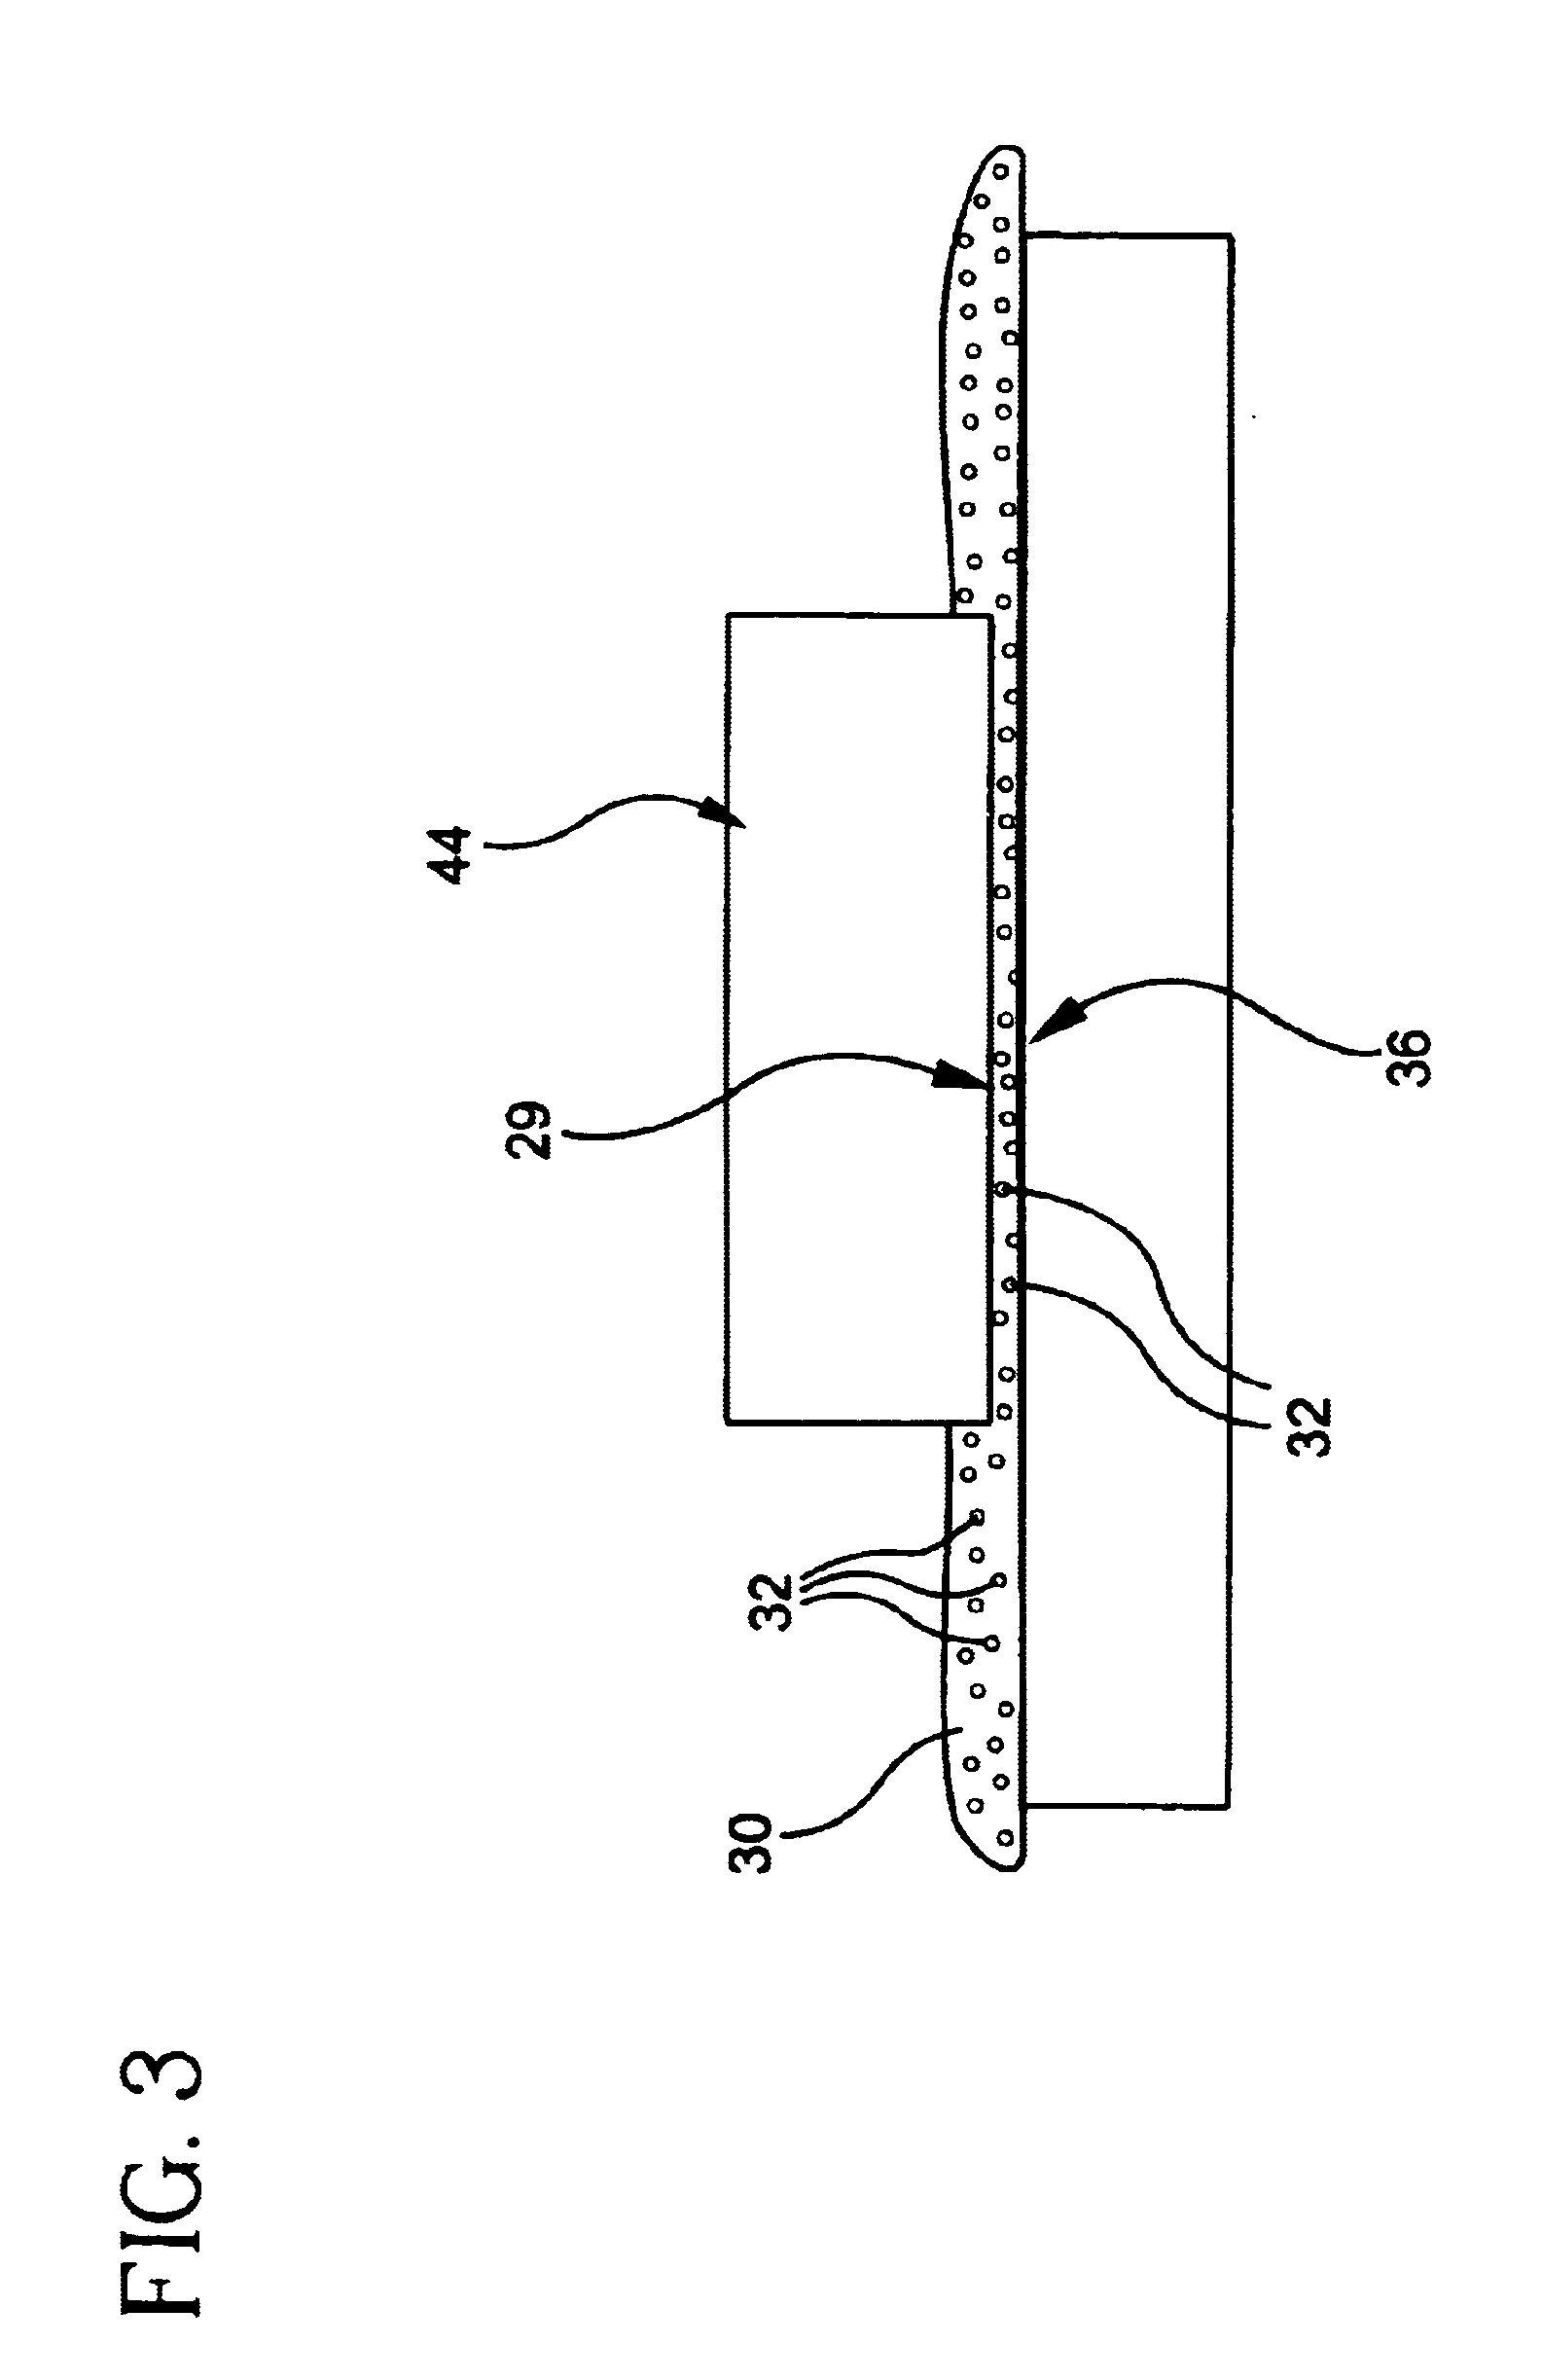 Method of making optical fluoride laser crystal components